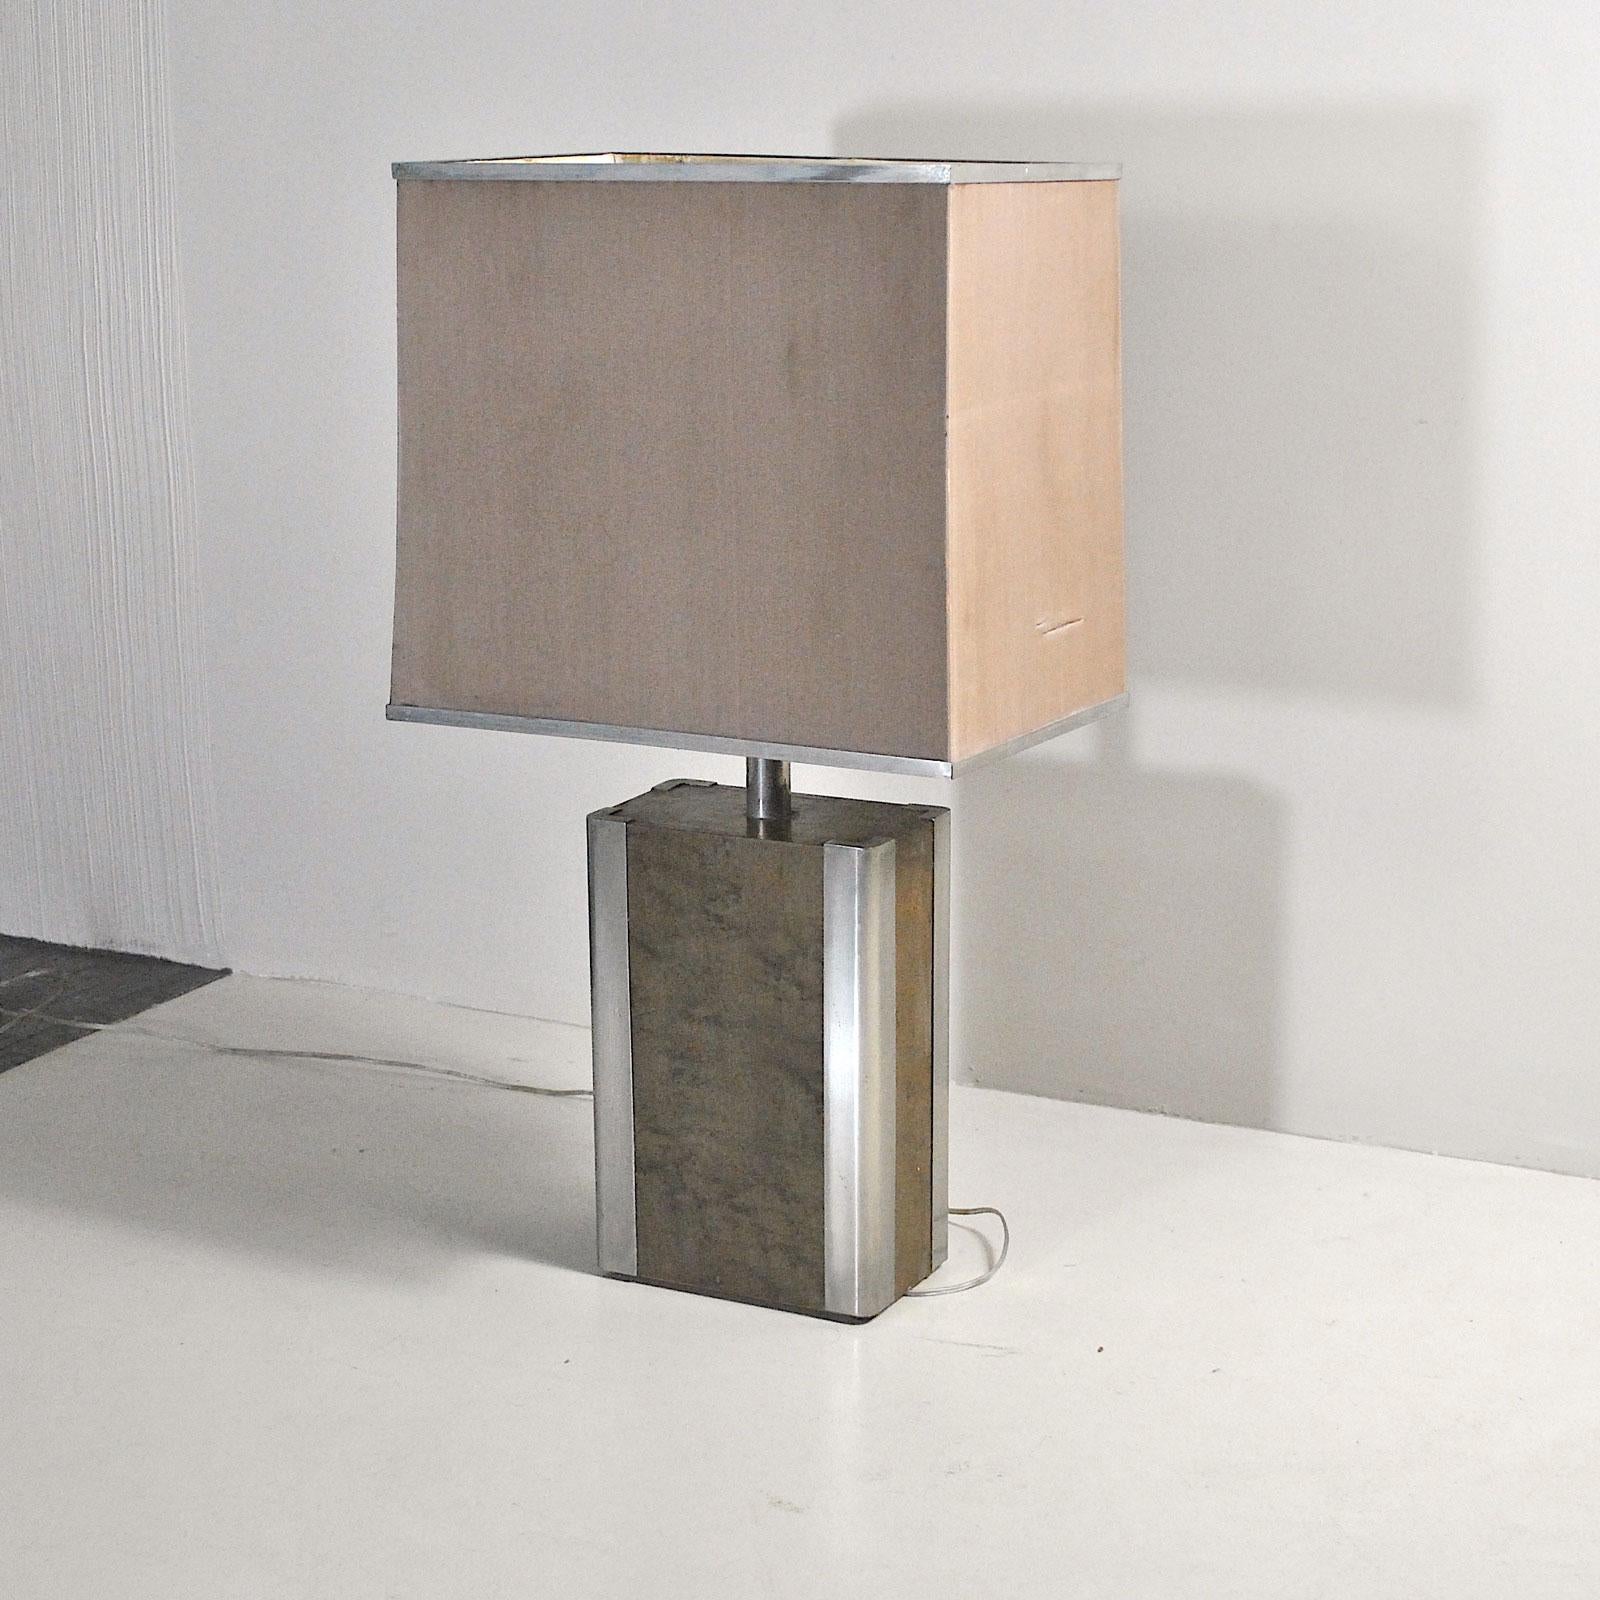 Late 20th Century Italian Midcentury Table Lamp in Drawn Wood and Steel from the 1970s